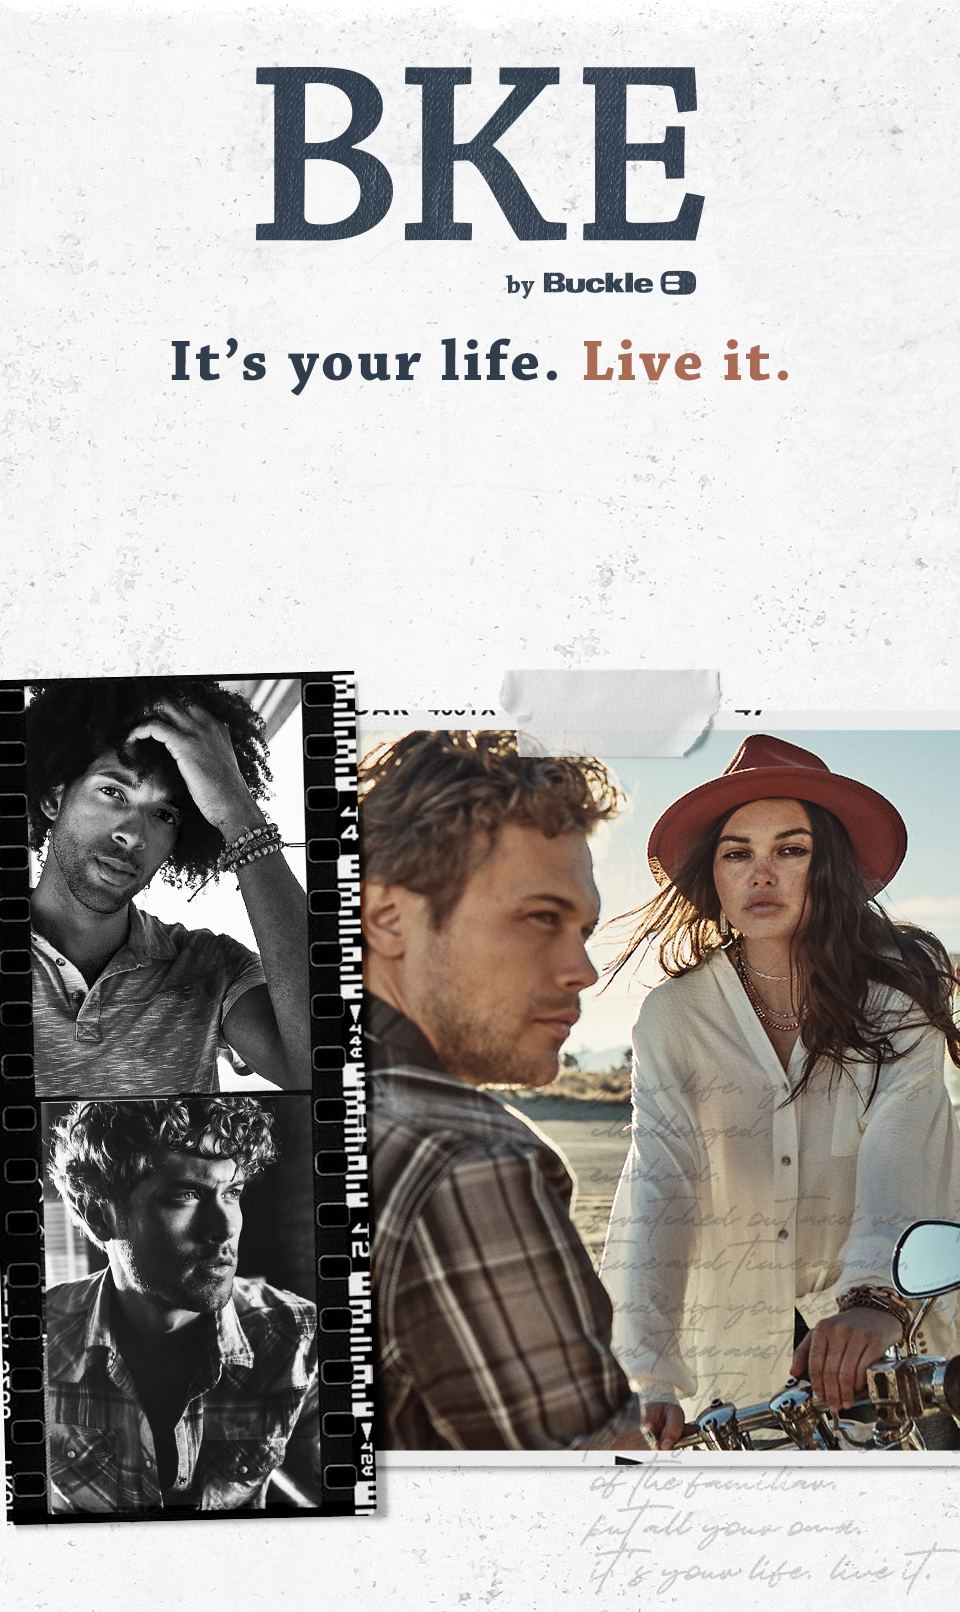 BKE. It's Your Life. Live It. - A guy and gal wearing BKE only at Buckle.